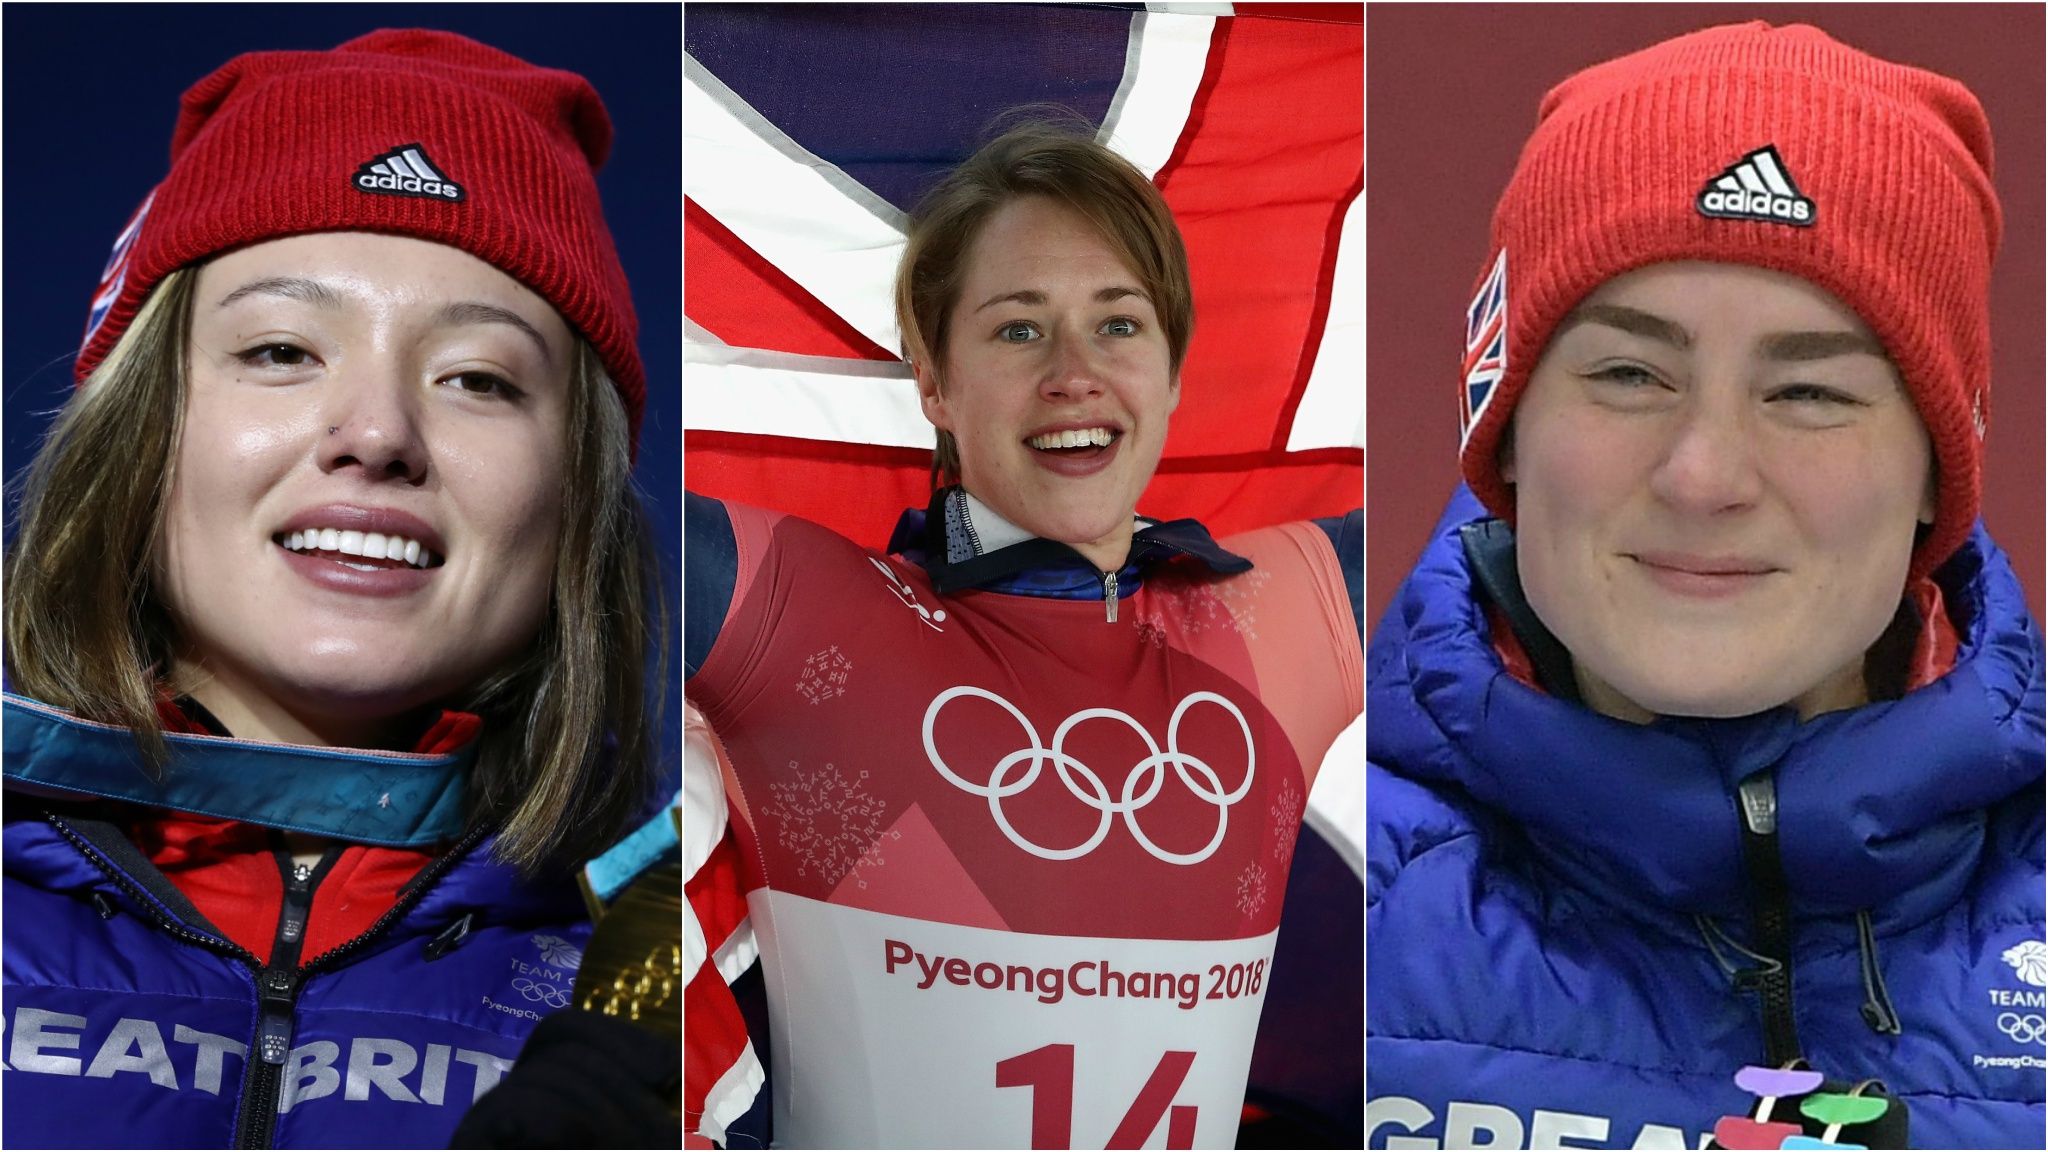 Lizzy Yarnold (centre), Izzy Atkin (left) and Laura Deas (right)